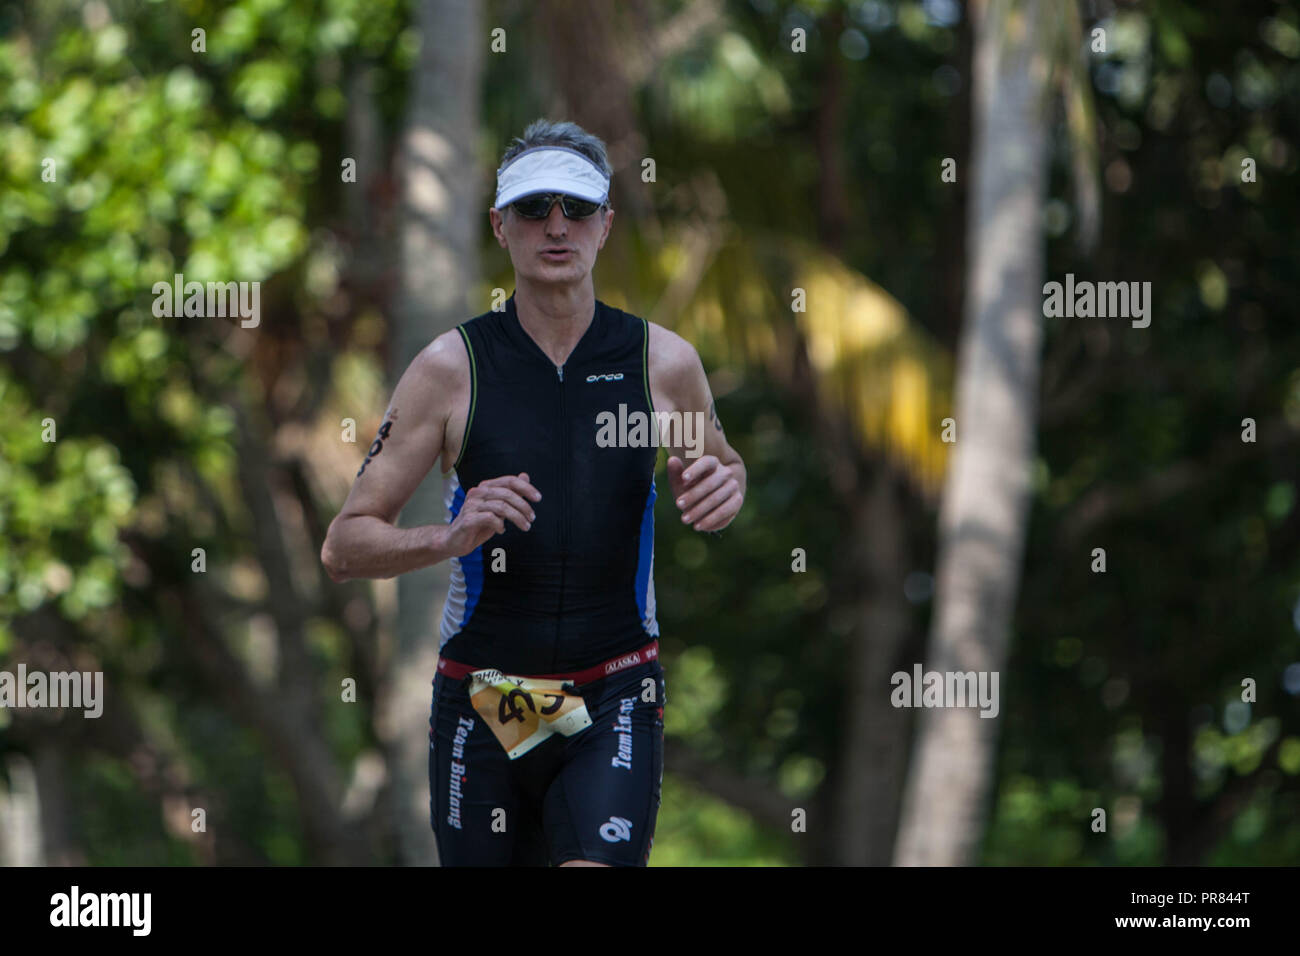 Tanjung Lesung, Banten, Indonesia. 30th Sep, 2018. Spain triathlon athletes, CARLOS MONTERDE during 2018 Rhino Cross Triathlon at Tanjung Lesung, Banten, Indonesia on September 30, 2018. He take take 5th in Rhino Male Master Category 02:31:21. Credit: Afriadi Hikmal/ZUMA Wire/Alamy Live News Stock Photo